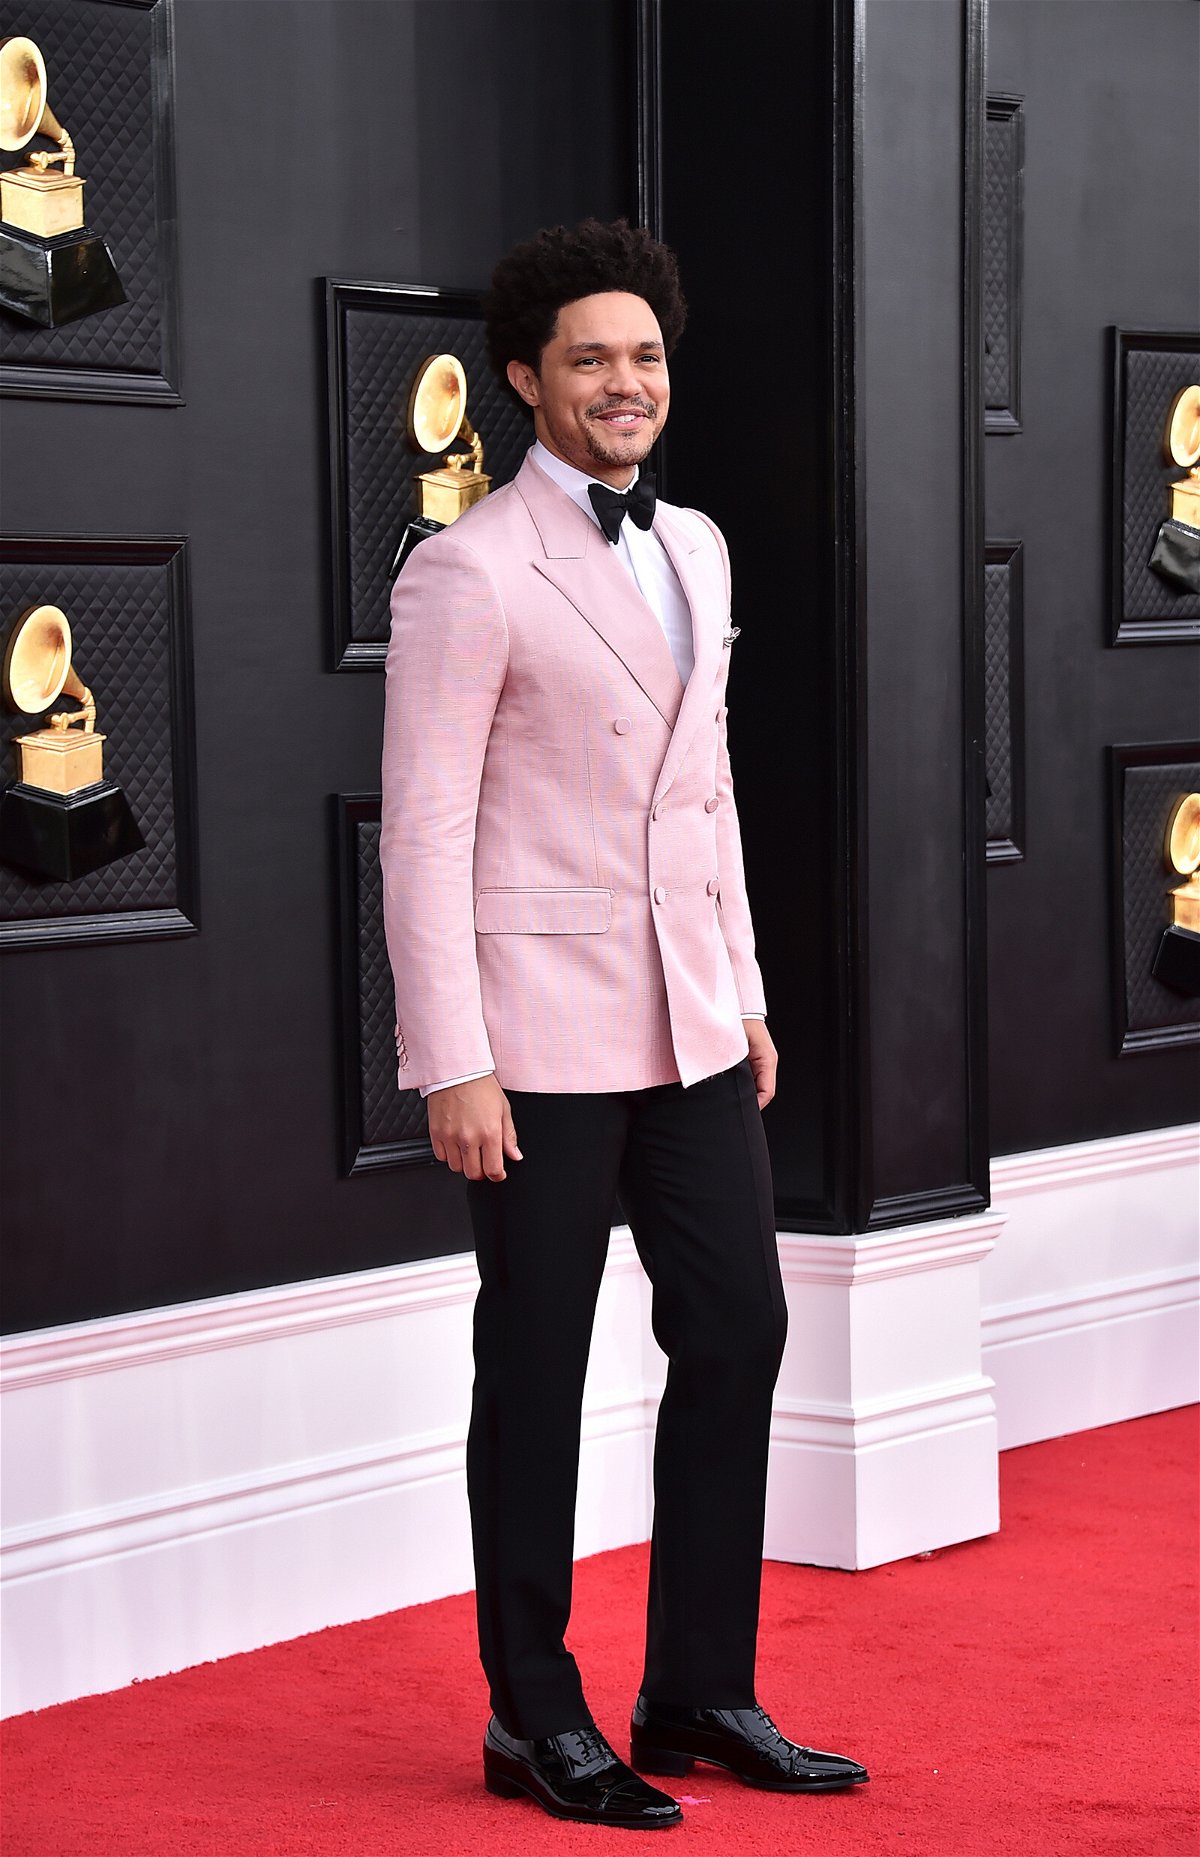 Best Red Carpet Fashion from the Grammys - THE HILL NEWS